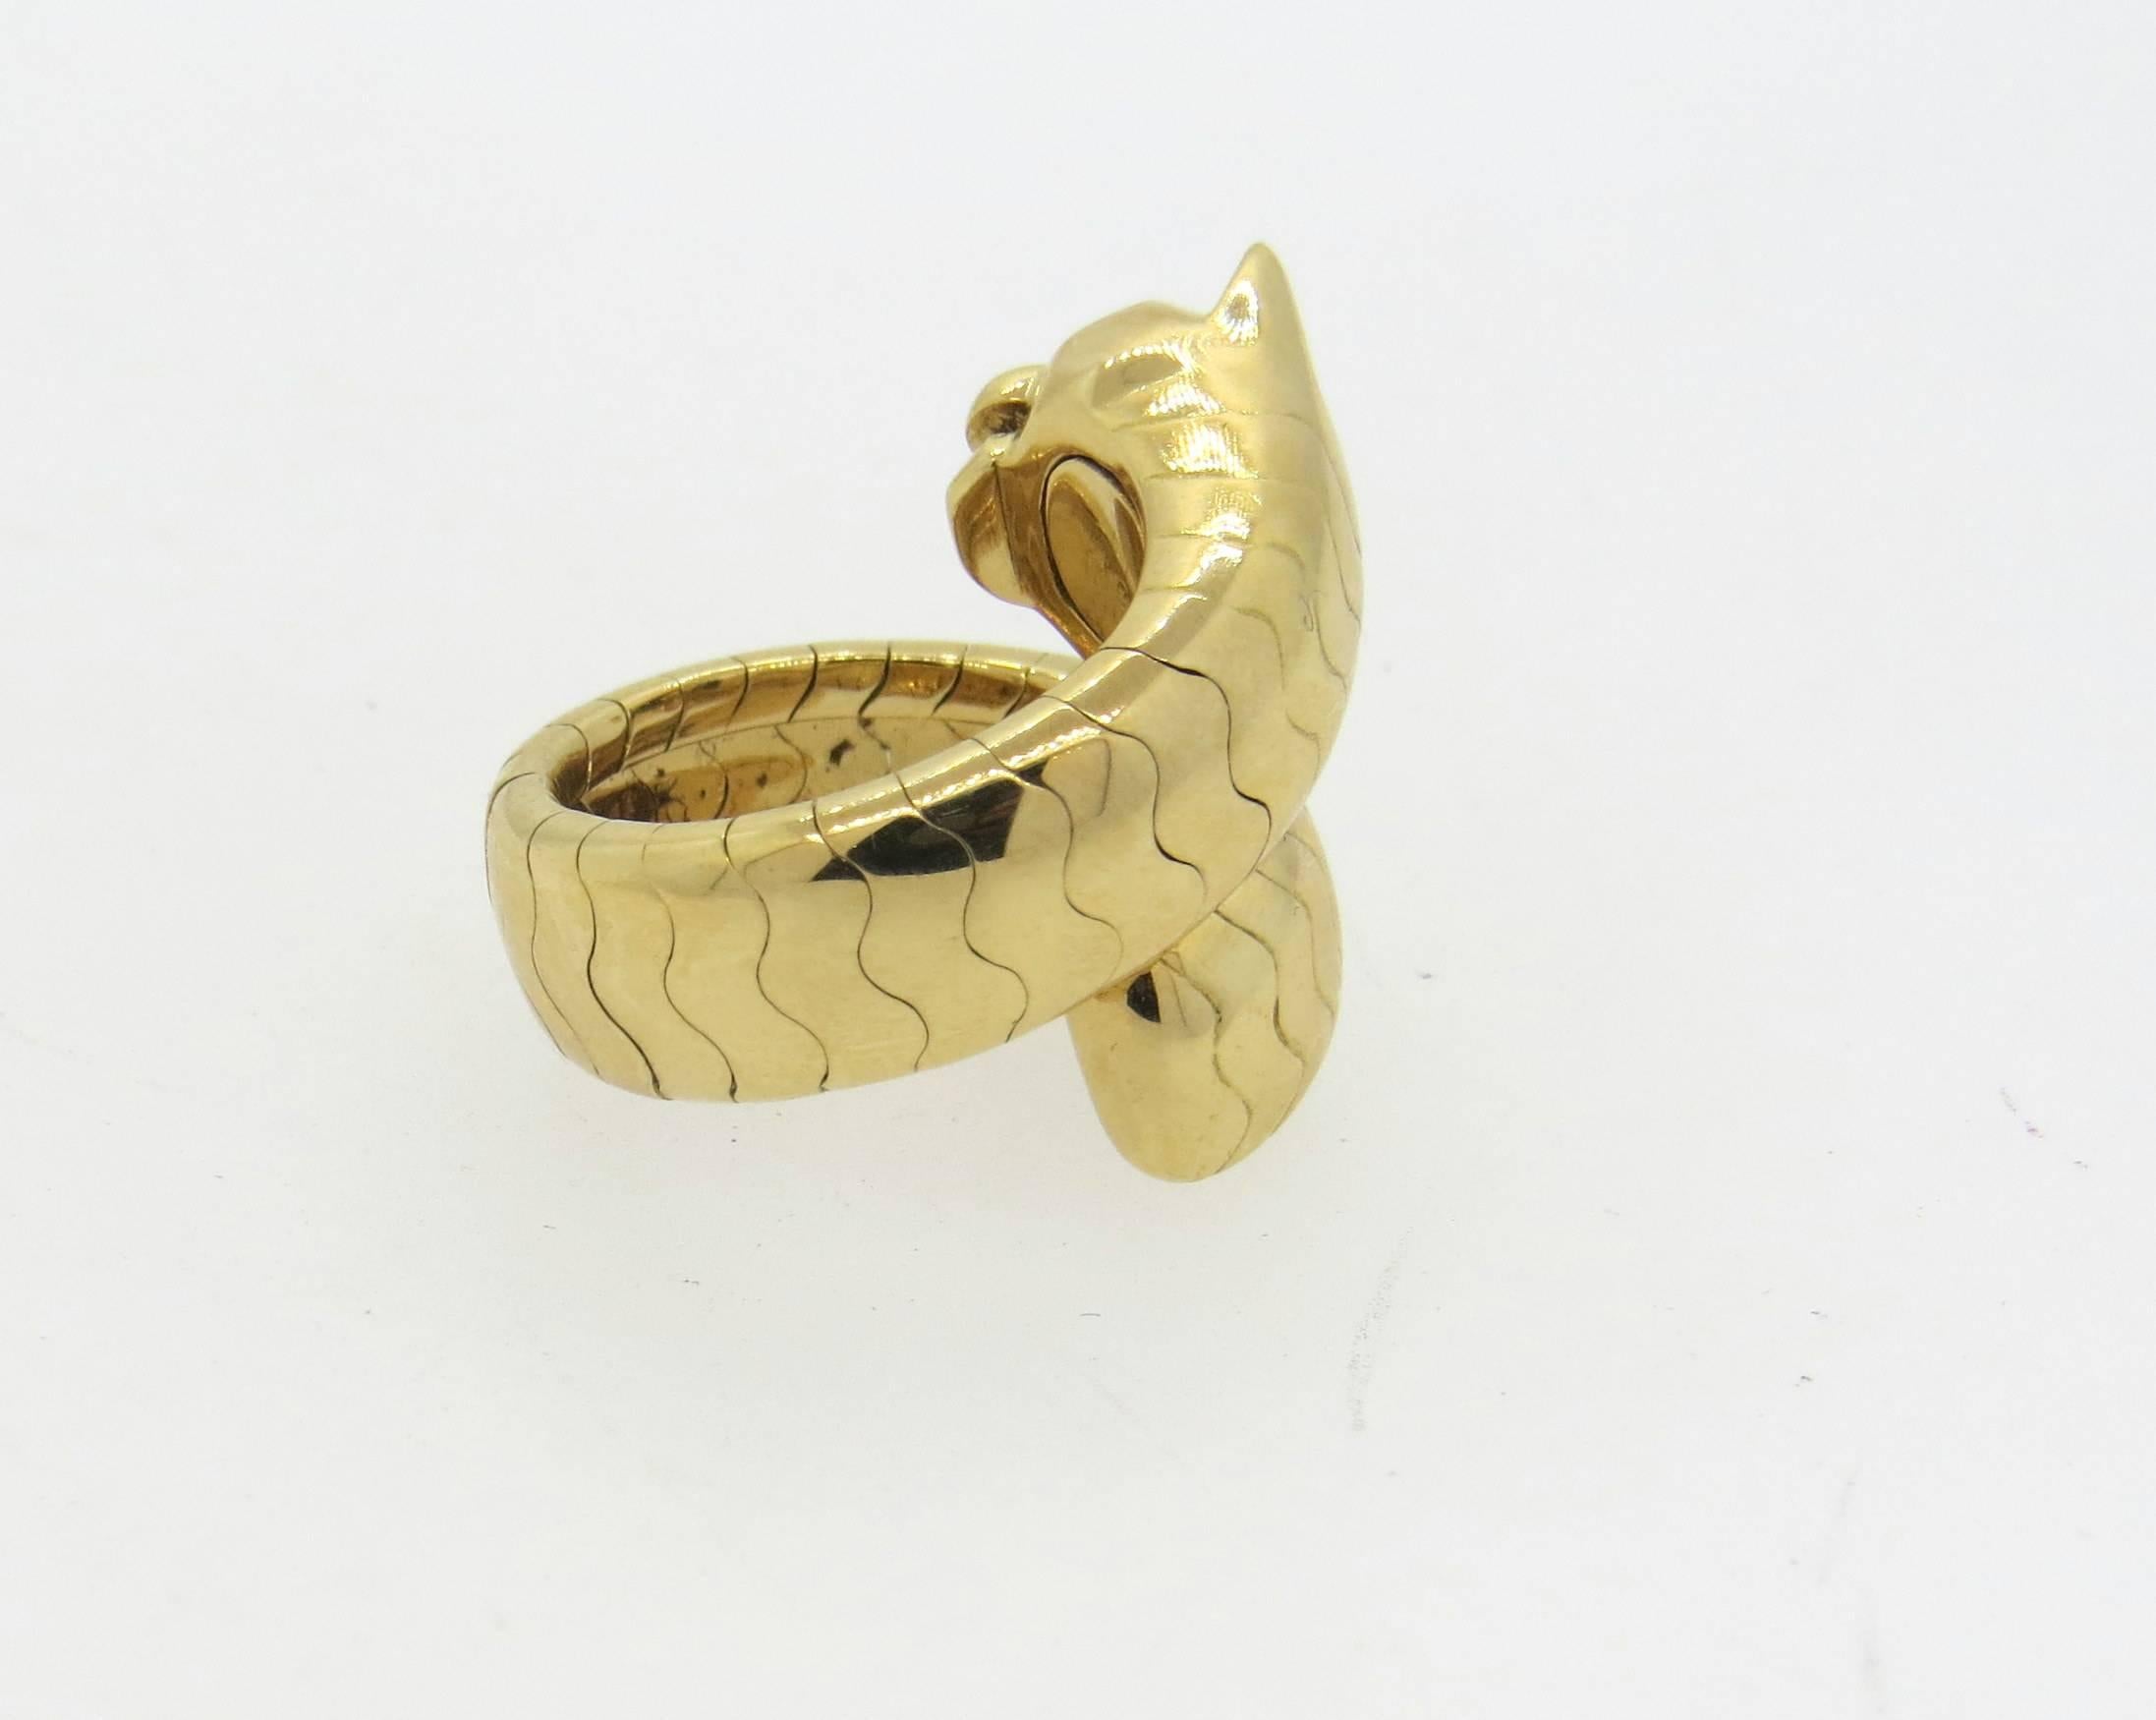 Impressive Cartier 18k yellow gold ring, crafted for Panthere collection, decorated with emerald eyes and onyx nose. Ring is a size 6 (slightly flexible), ring top is 21mm at widest point. Marked: 52, French gold marks,728015, Cartier, 750. Weight